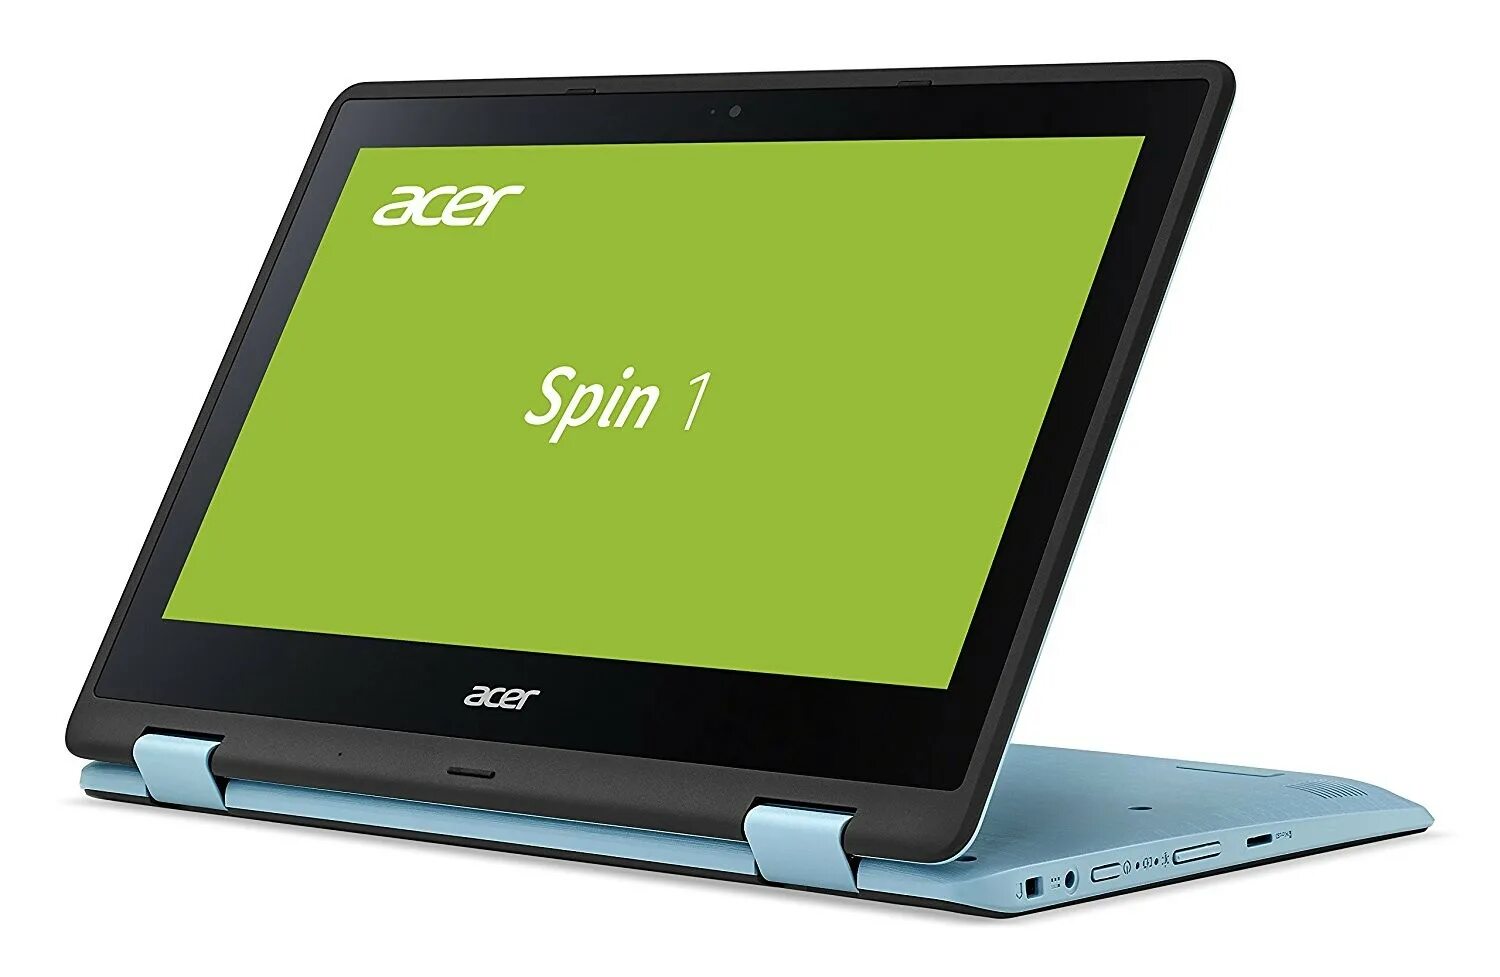 Acer spin sp111 32n. Acer Spin 1 sp111-32n. Асер спин 7. Acer Spin 1 SP 111-31. Асер ноутбук 10.1.